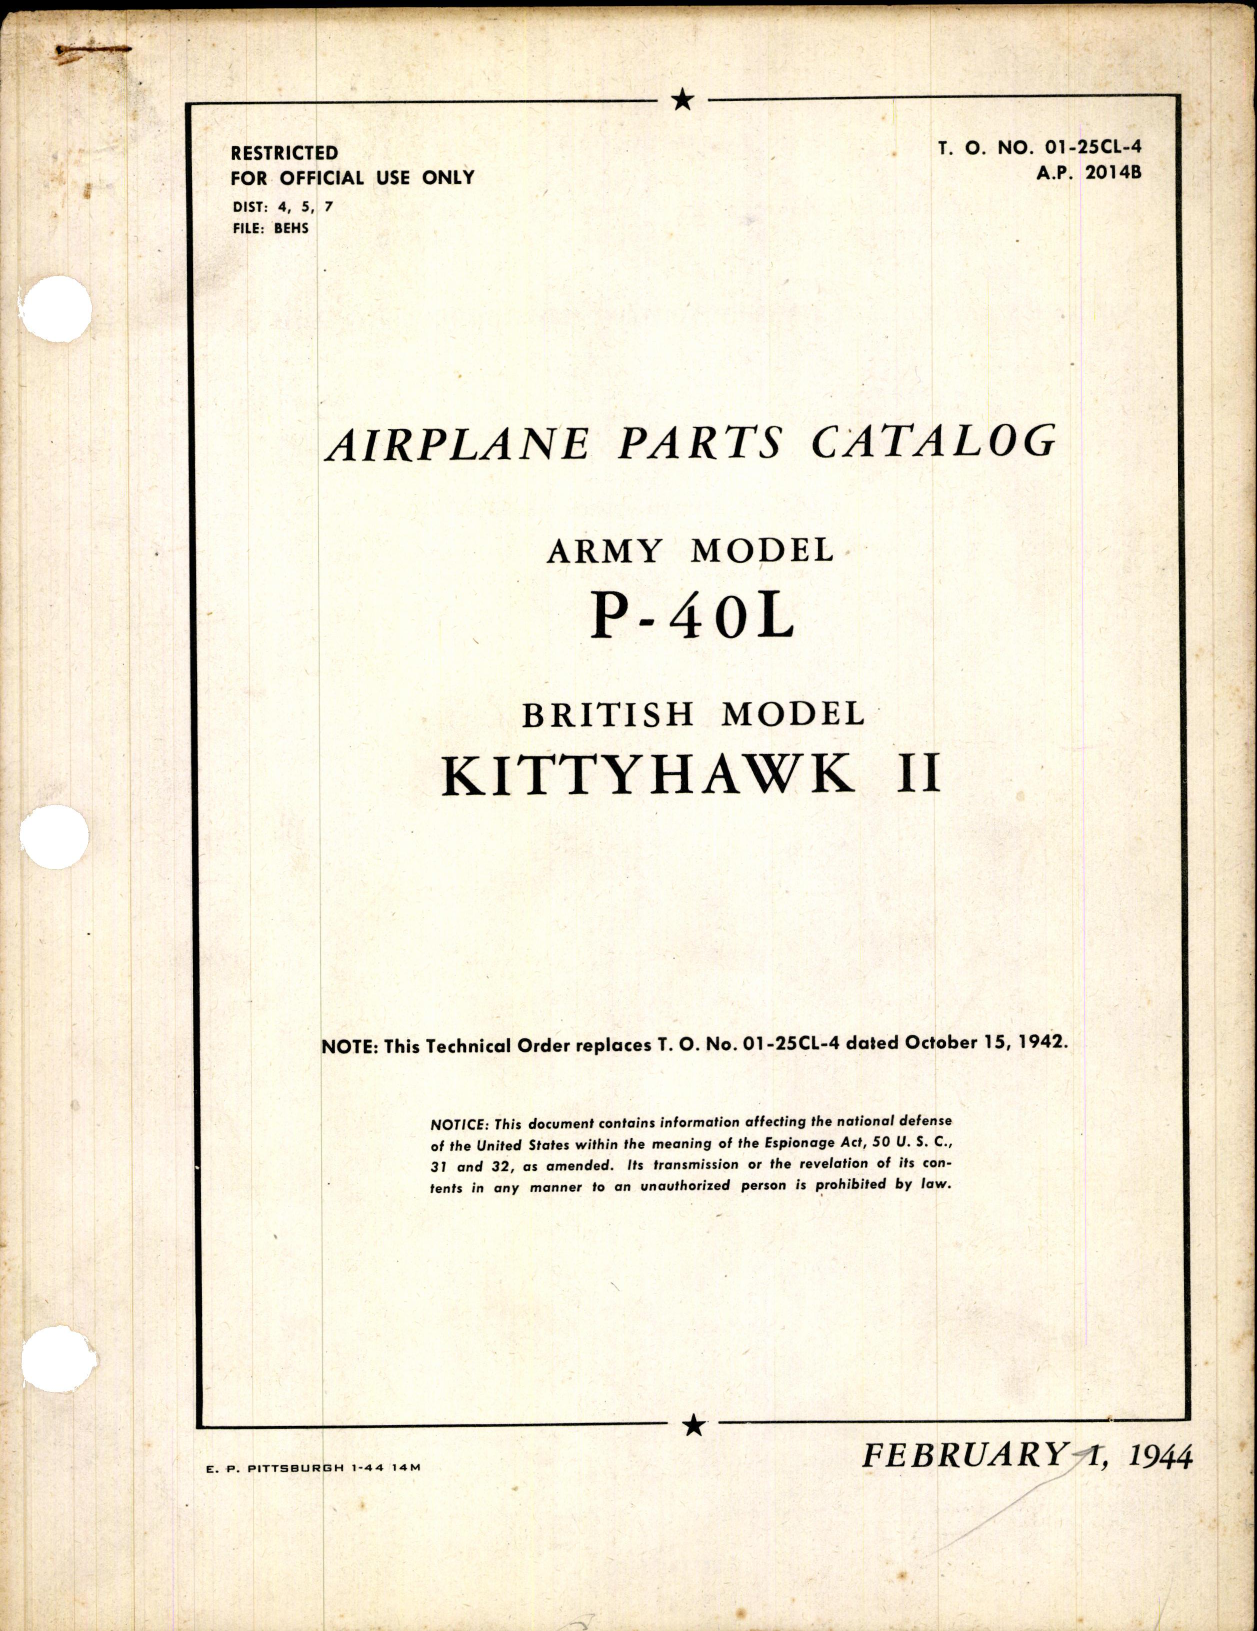 Sample page 1 from AirCorps Library document: Parts Catalog for Army Model P-40L